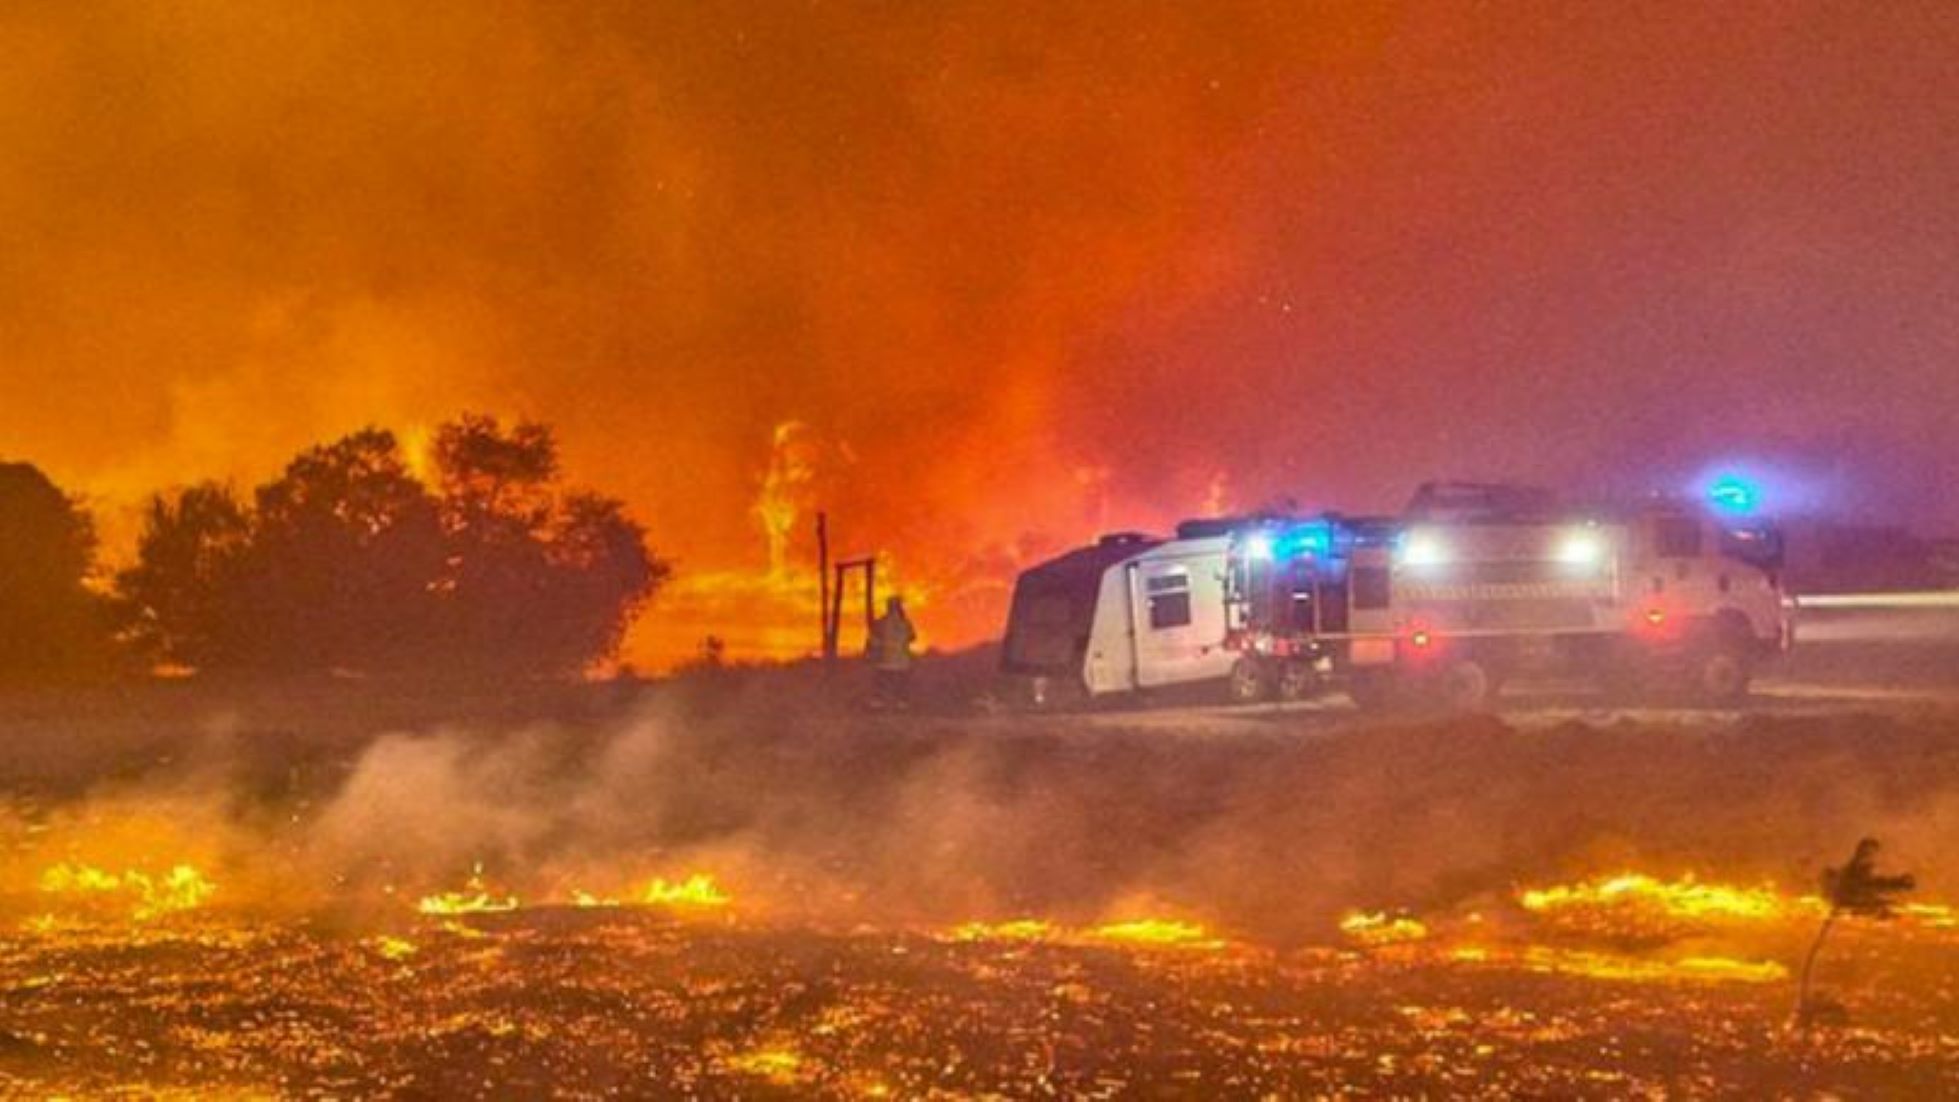 Bushfire “Contained But Not Controlled” After Properties Destroyed In Western Australia